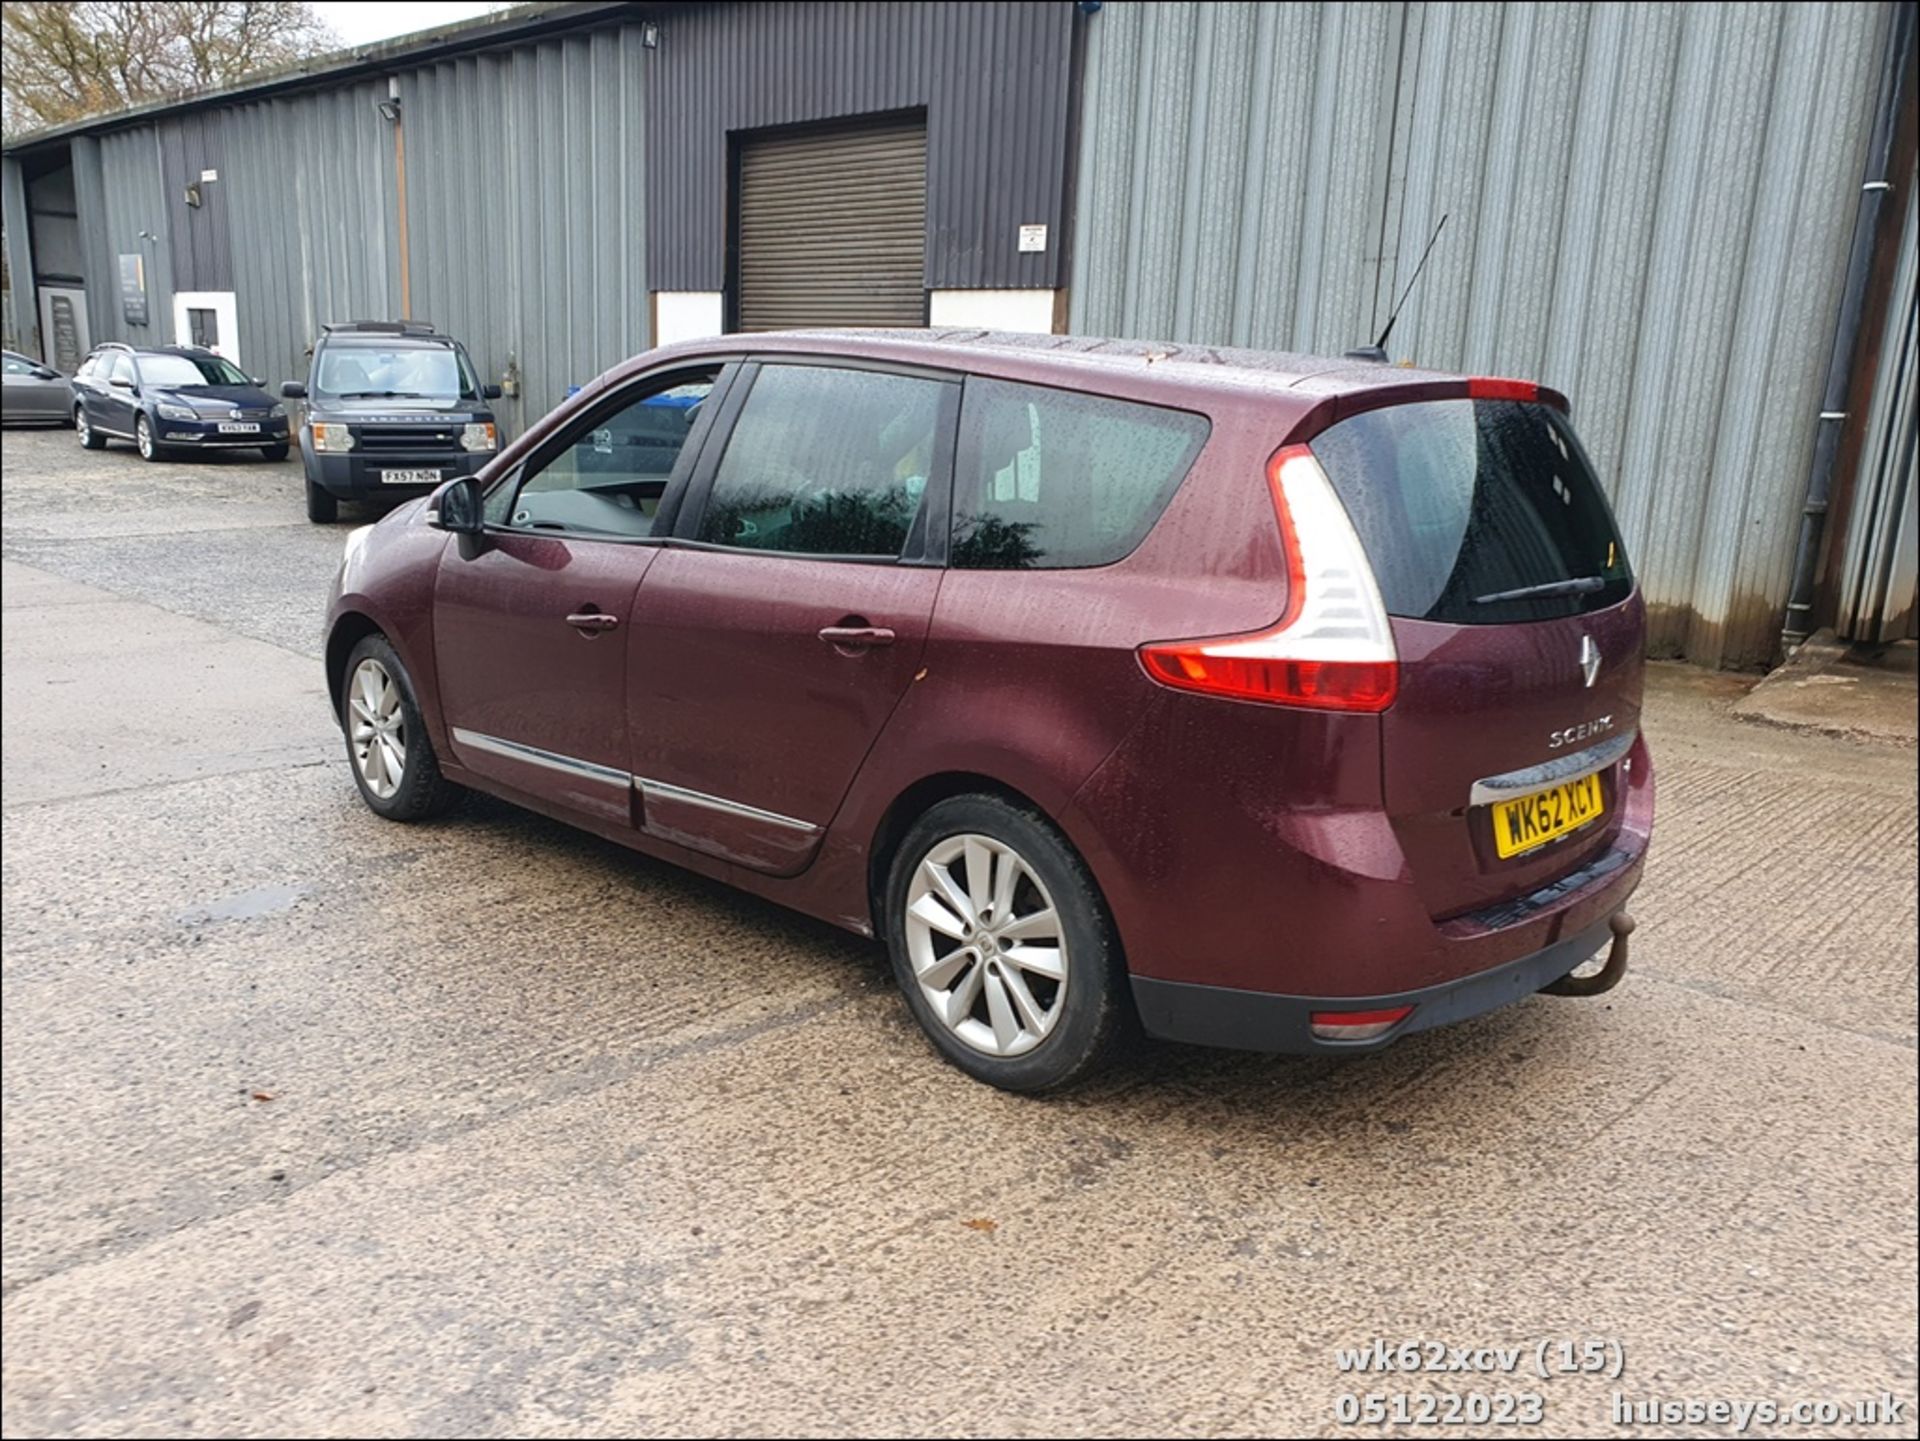 12/62 RENAULT G SCENIC D-QUETTLUXE NRG - 1598cc 5dr MPV (Red) - Image 16 of 53